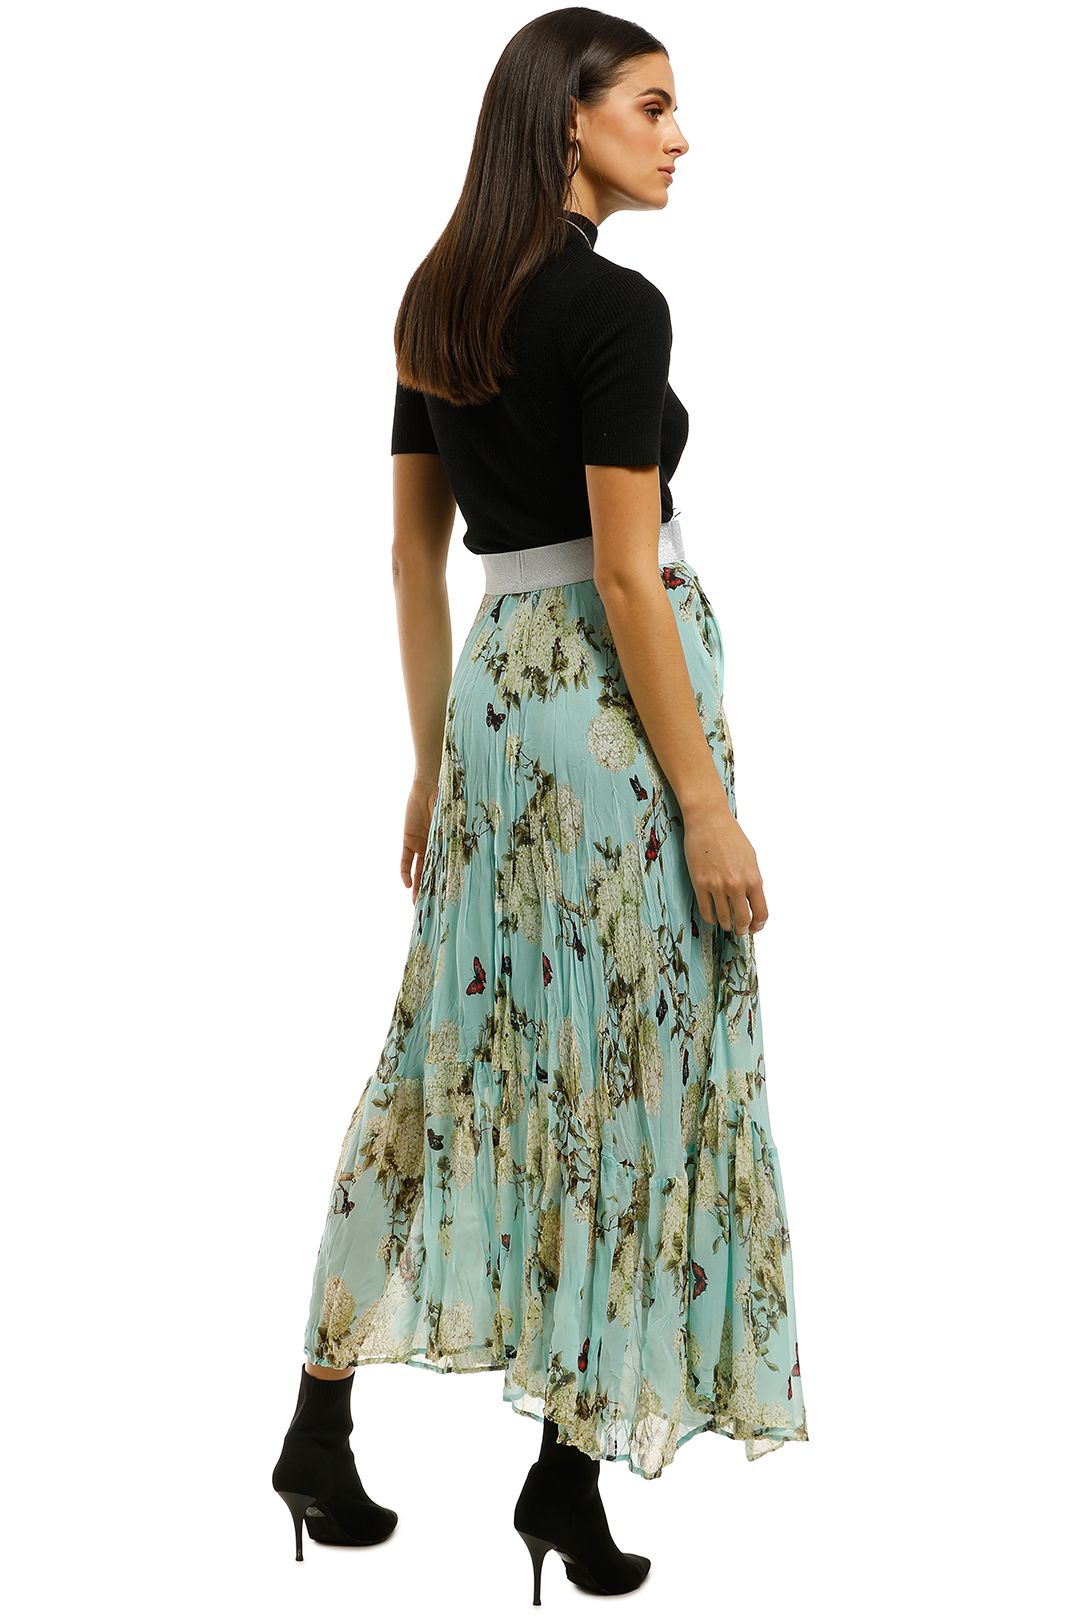 Curate-by-Trelise-Cooper-Long-Heart-Skirt-Floral-Back